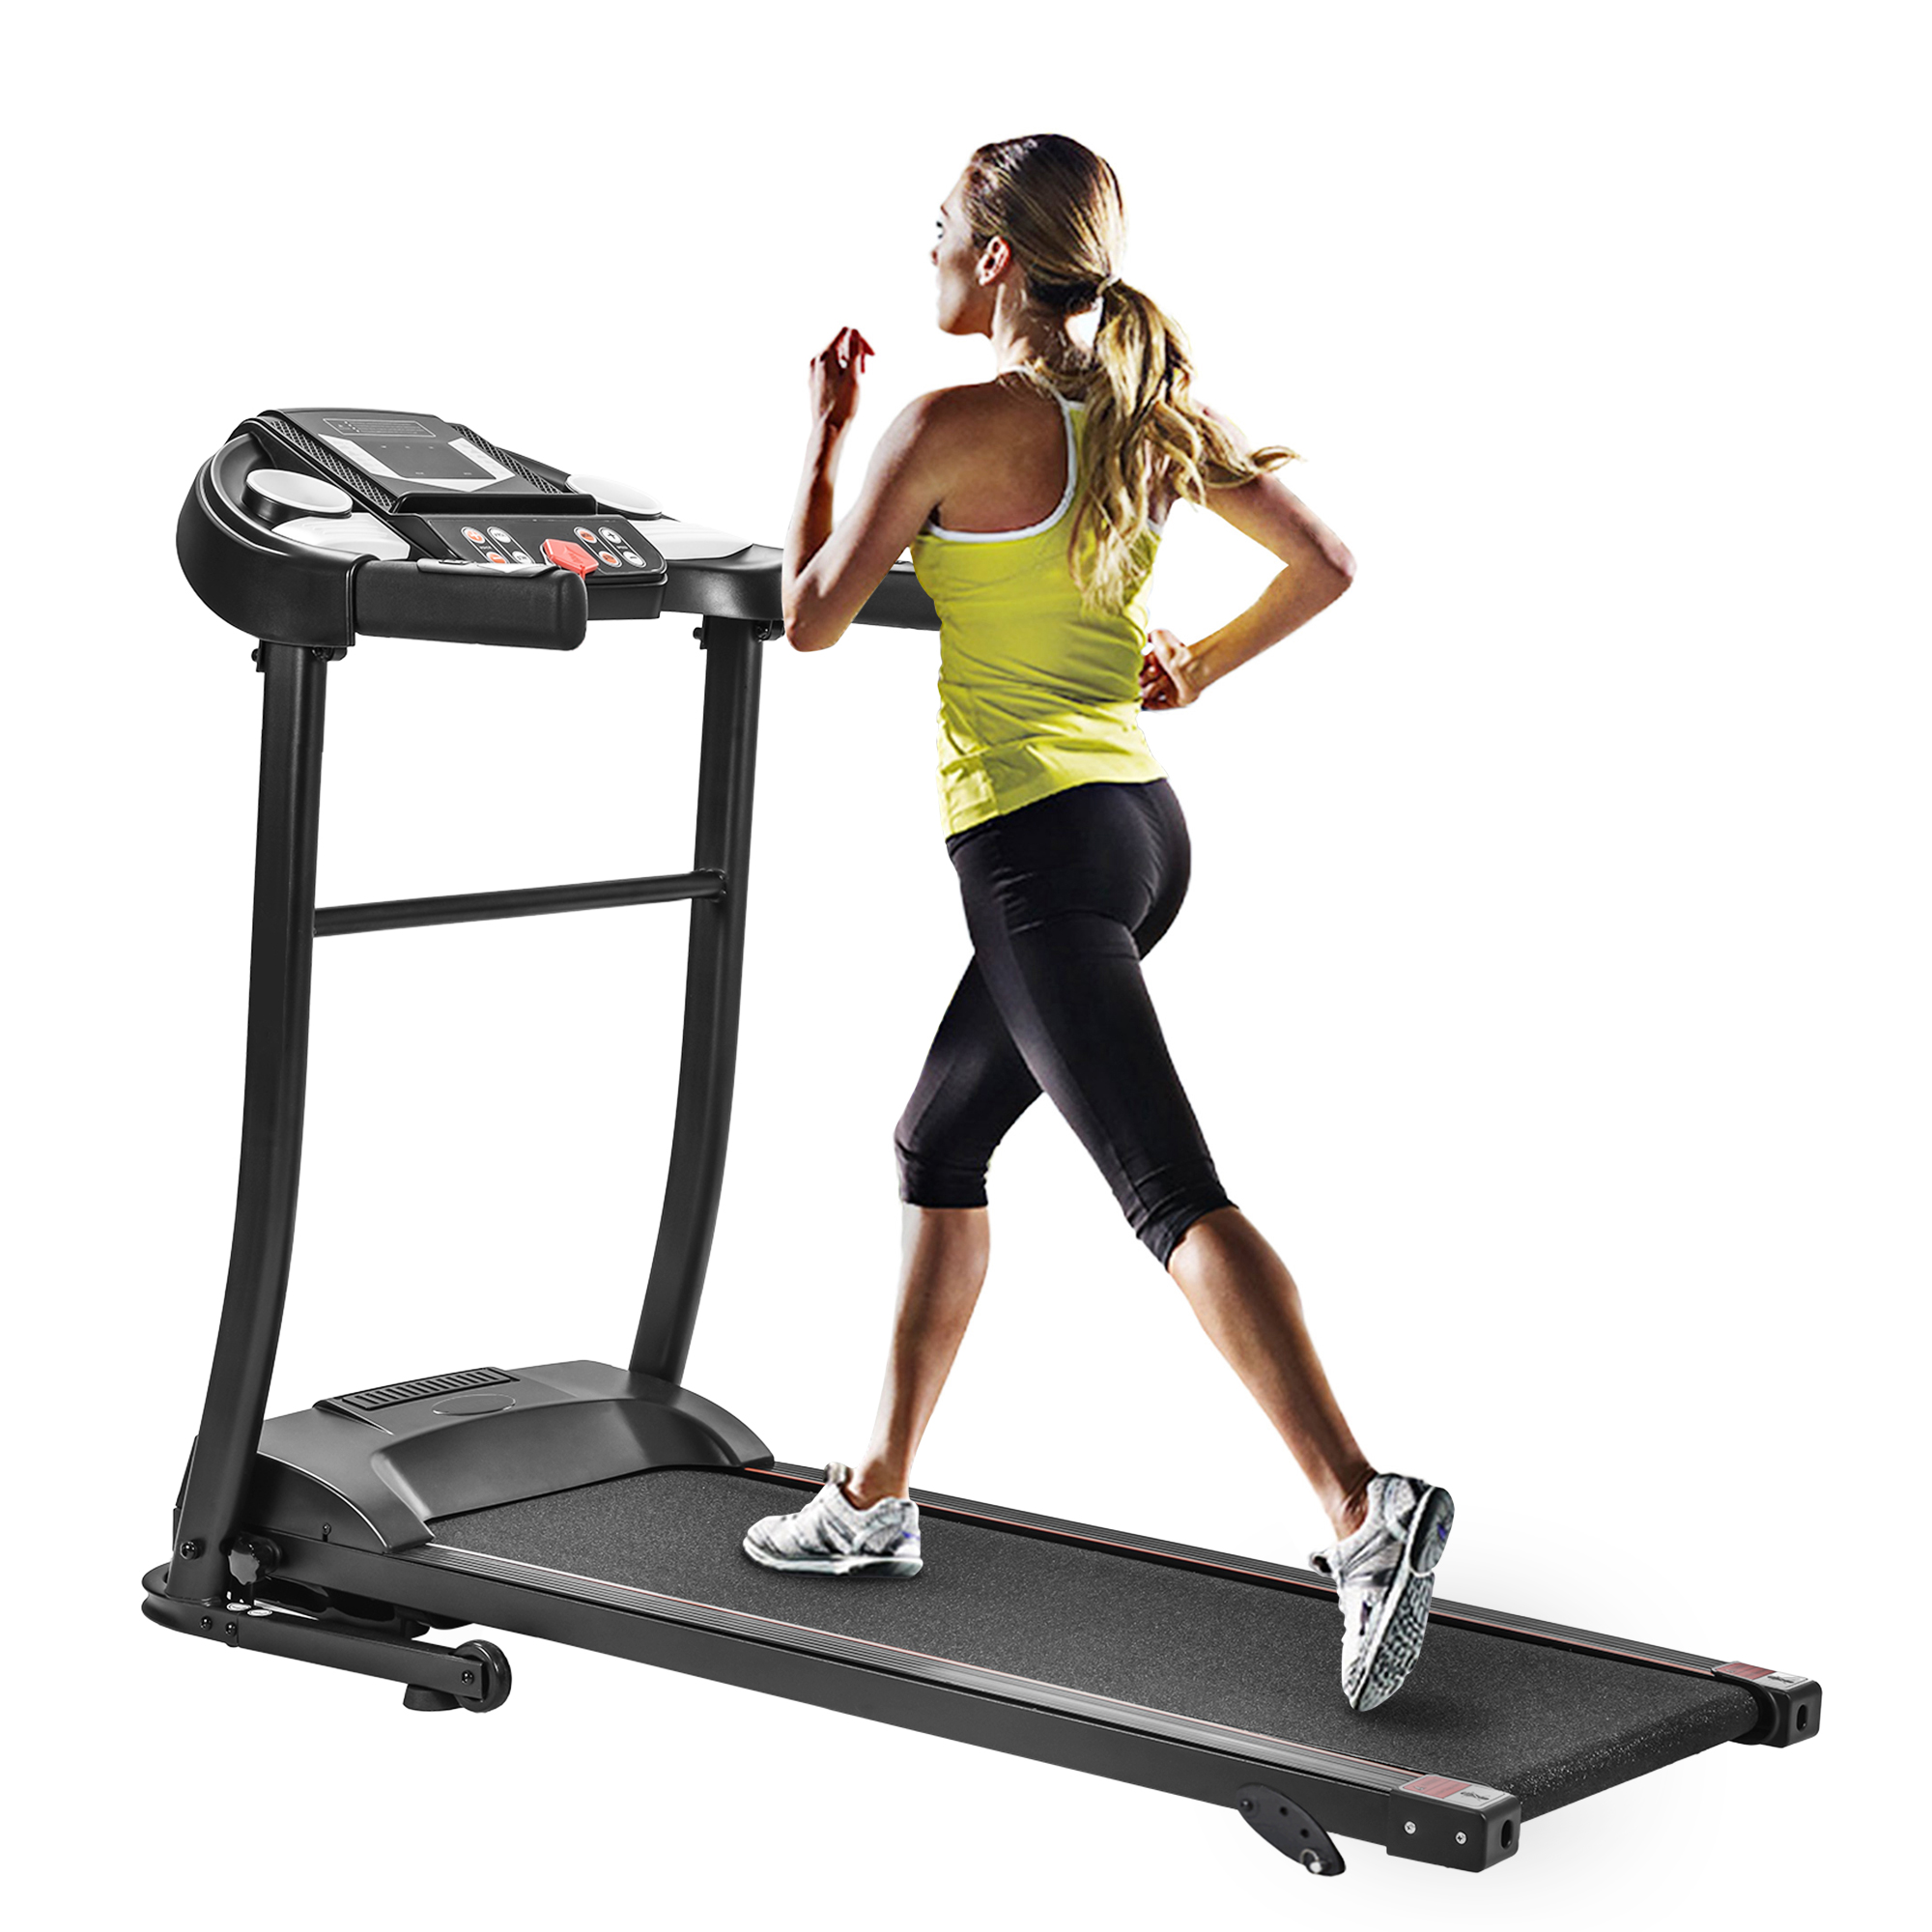 Folding Treadmill Manual Walking Running Machine with Adjustable Height & Incline Levels Jogging Walking Machine with LED Display for Home Gym Workout Cardio Fitness Small Spaces 